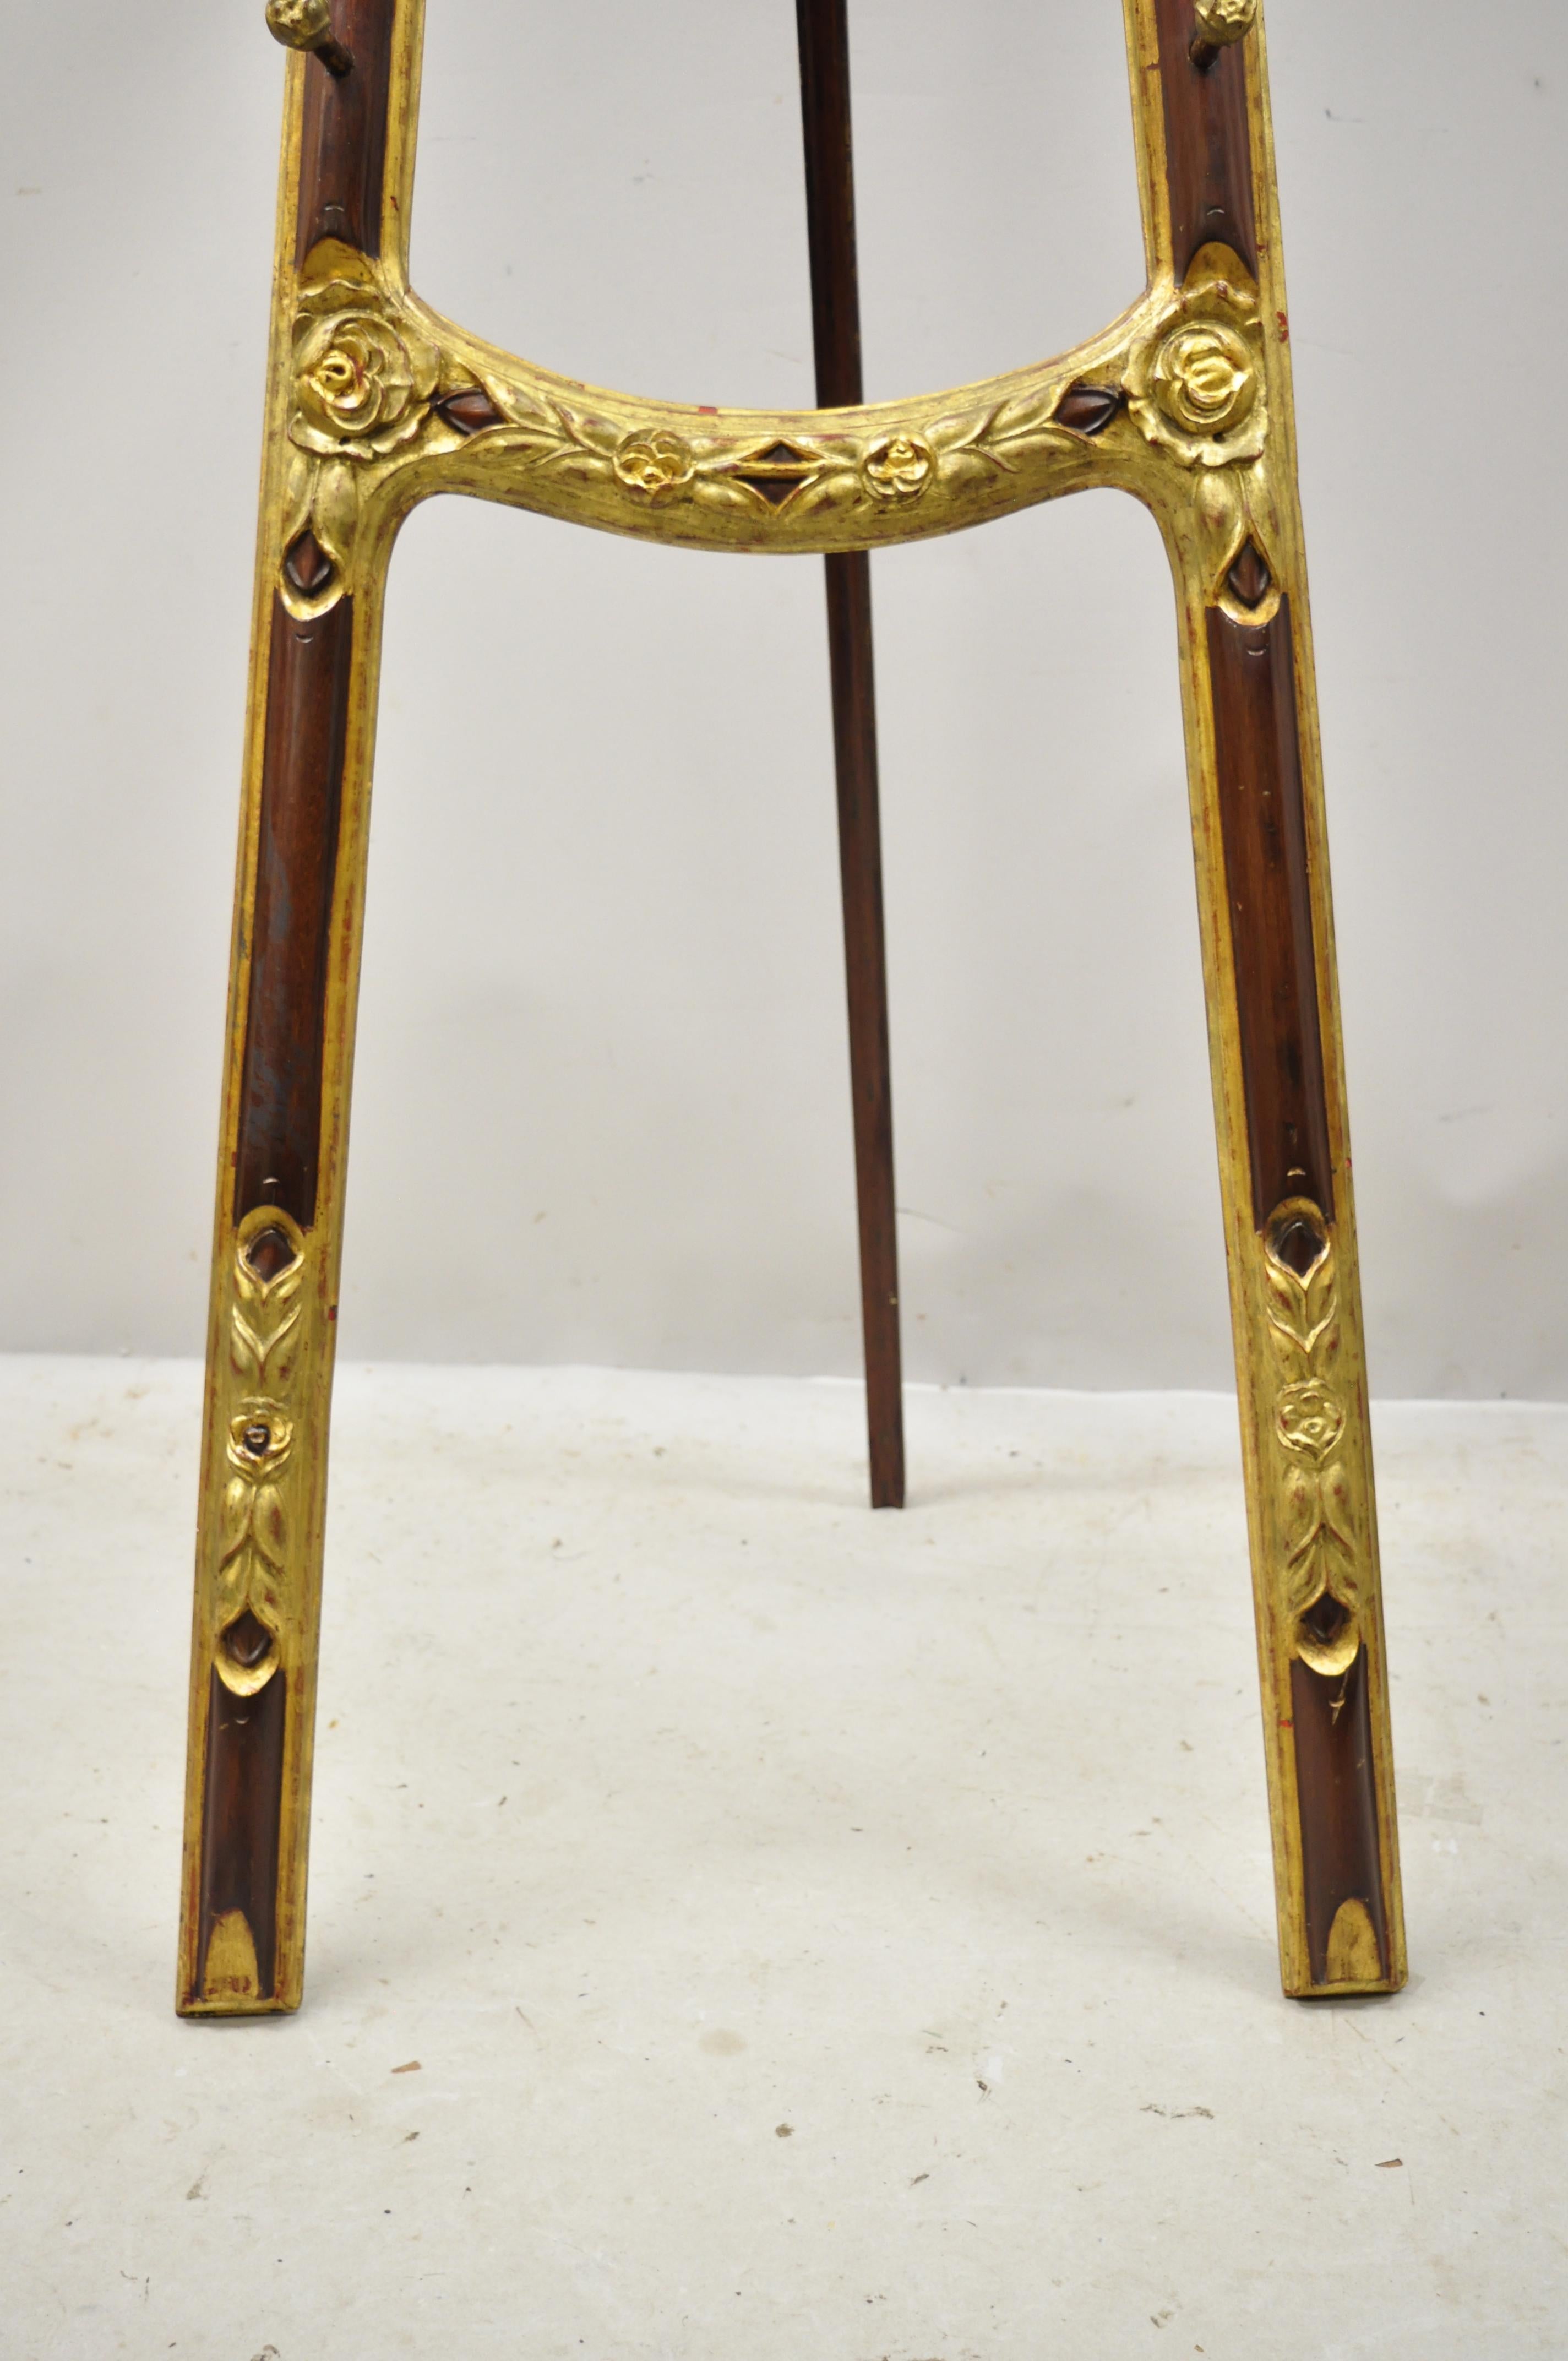 Rococo Antique Italian Carved Wood Easel Gold Gilt French Art Painting Stand Display